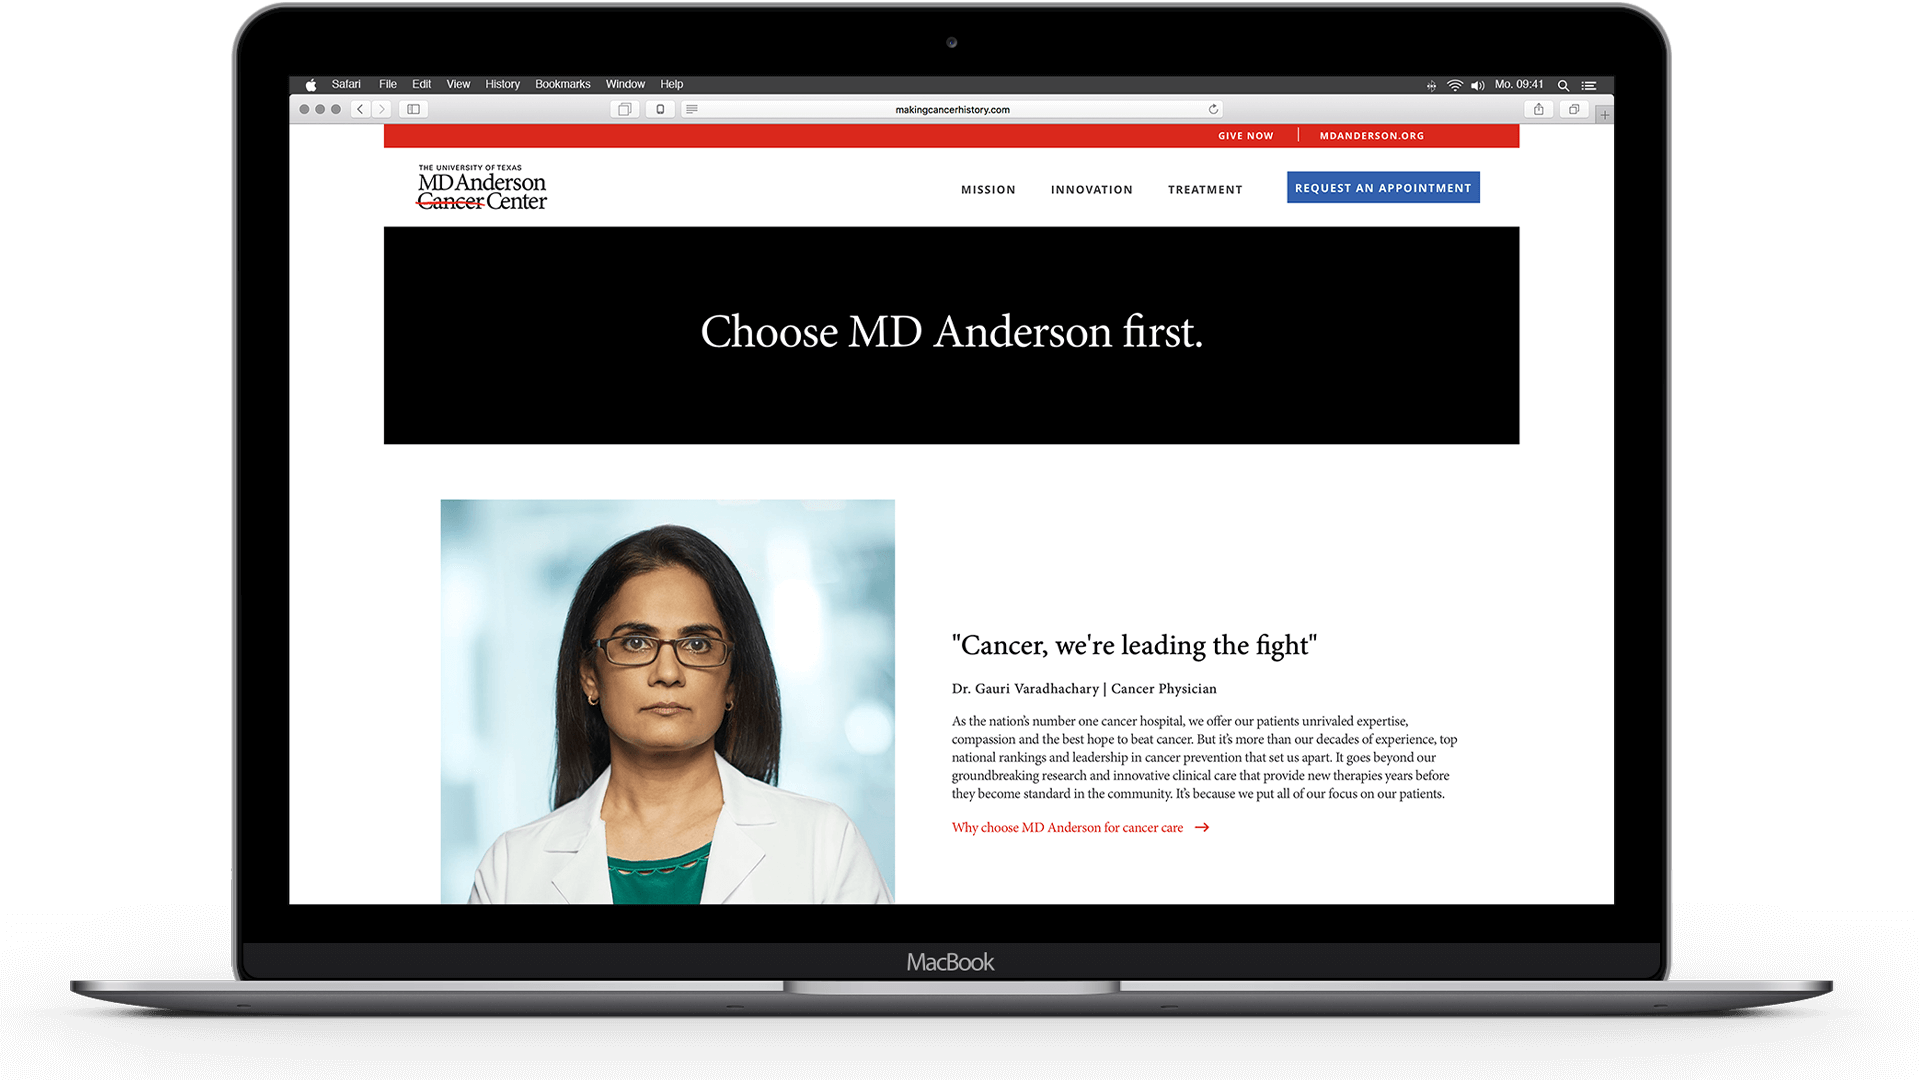 MD Anderson Making Cancer History campaign on laptop screen